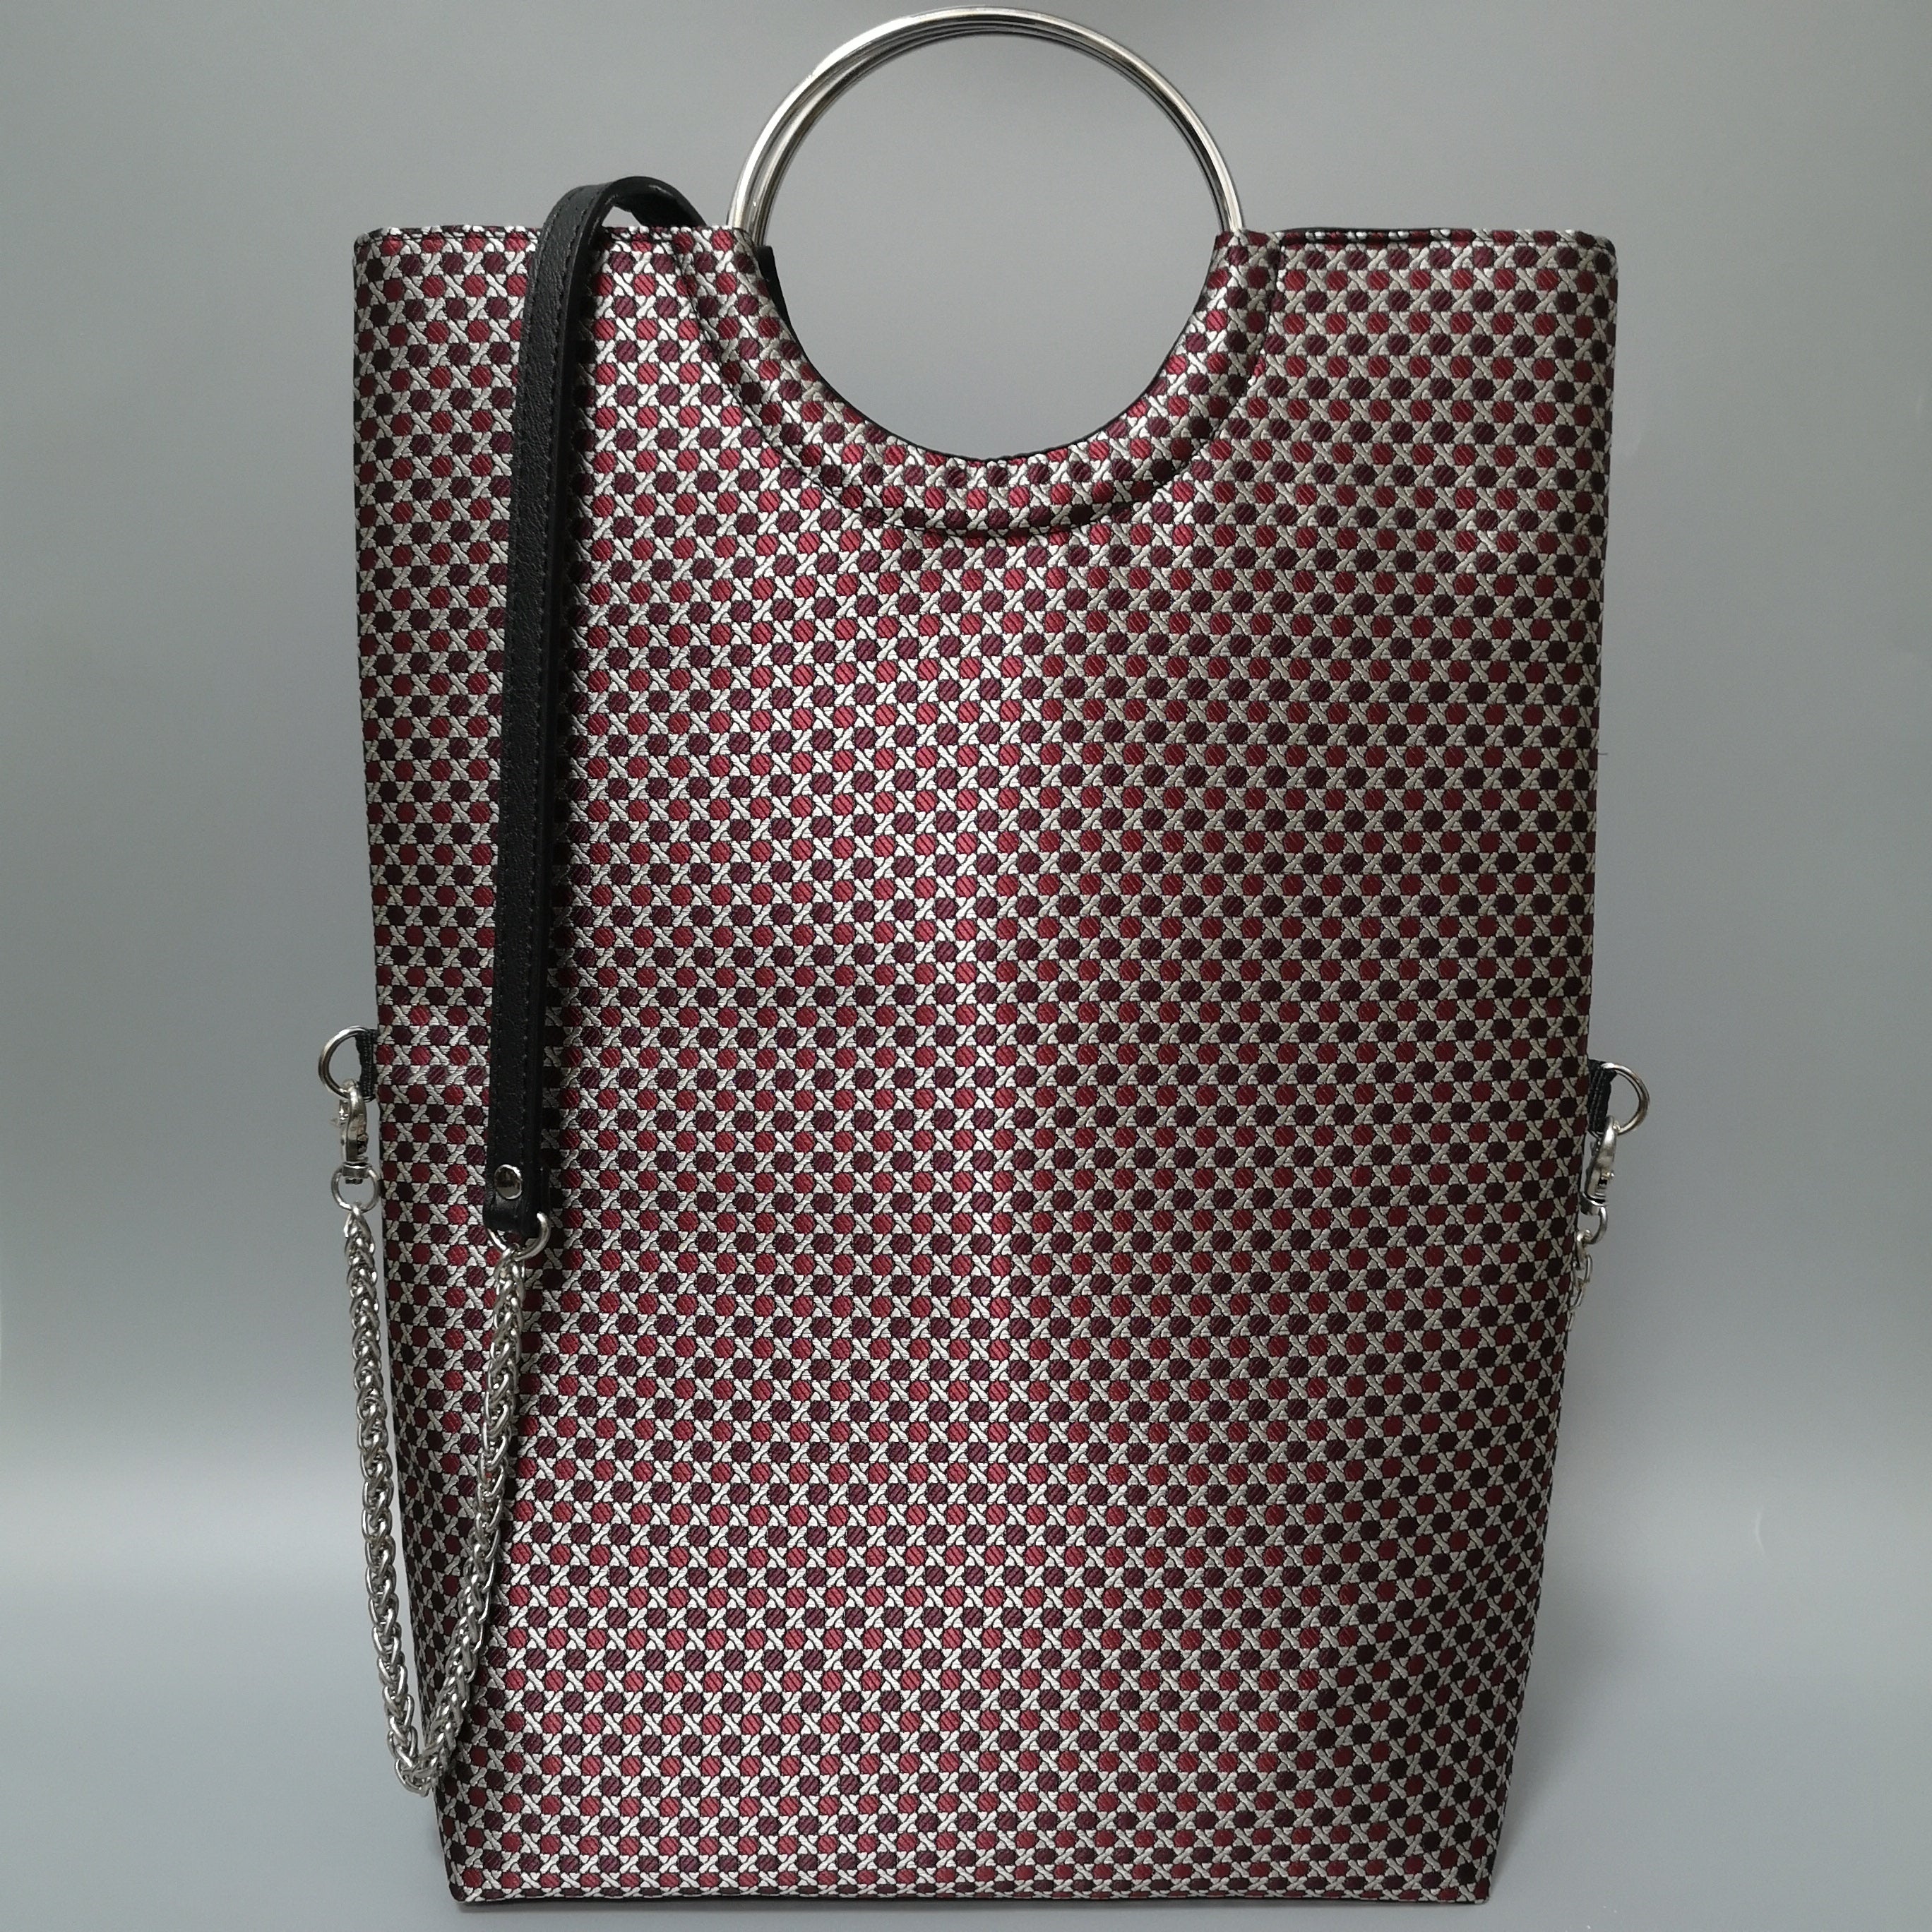 *CTS- Clutch Tote Sling Bag- 1023